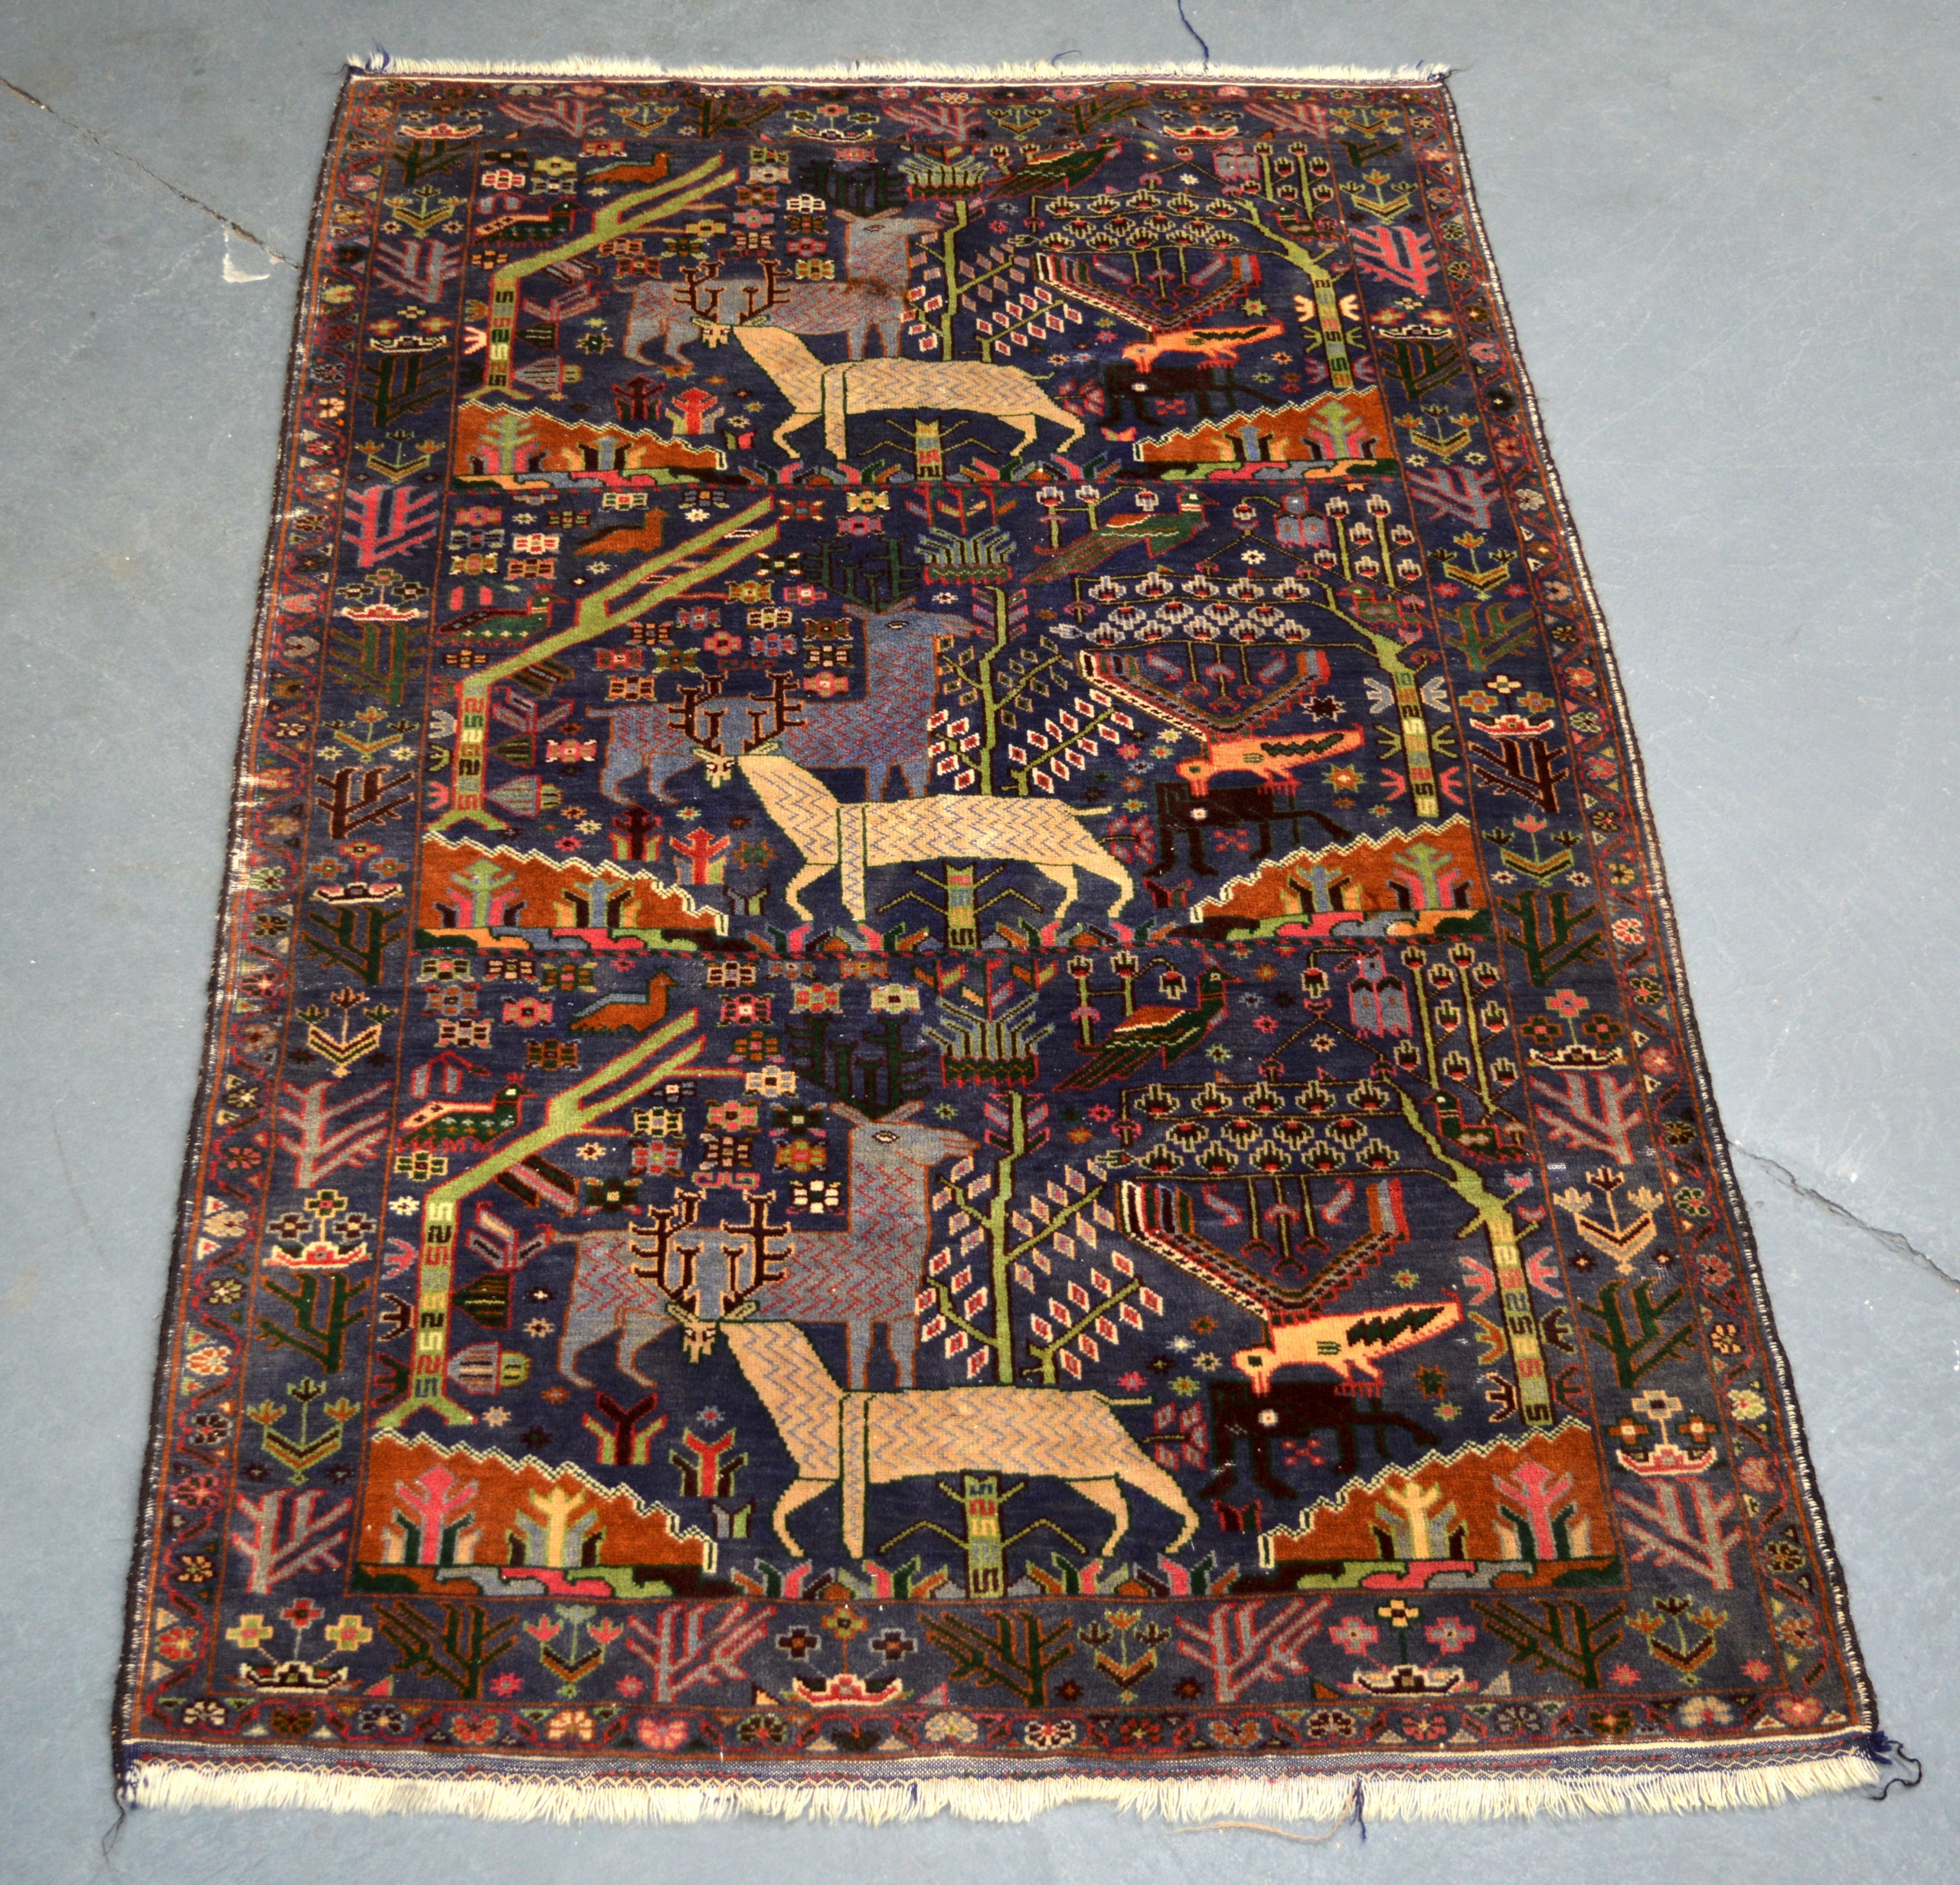 A PERSIAN PICTORIAL RUG 20th Century, depicting birds and fallow deer. 200Cm x 123cm.